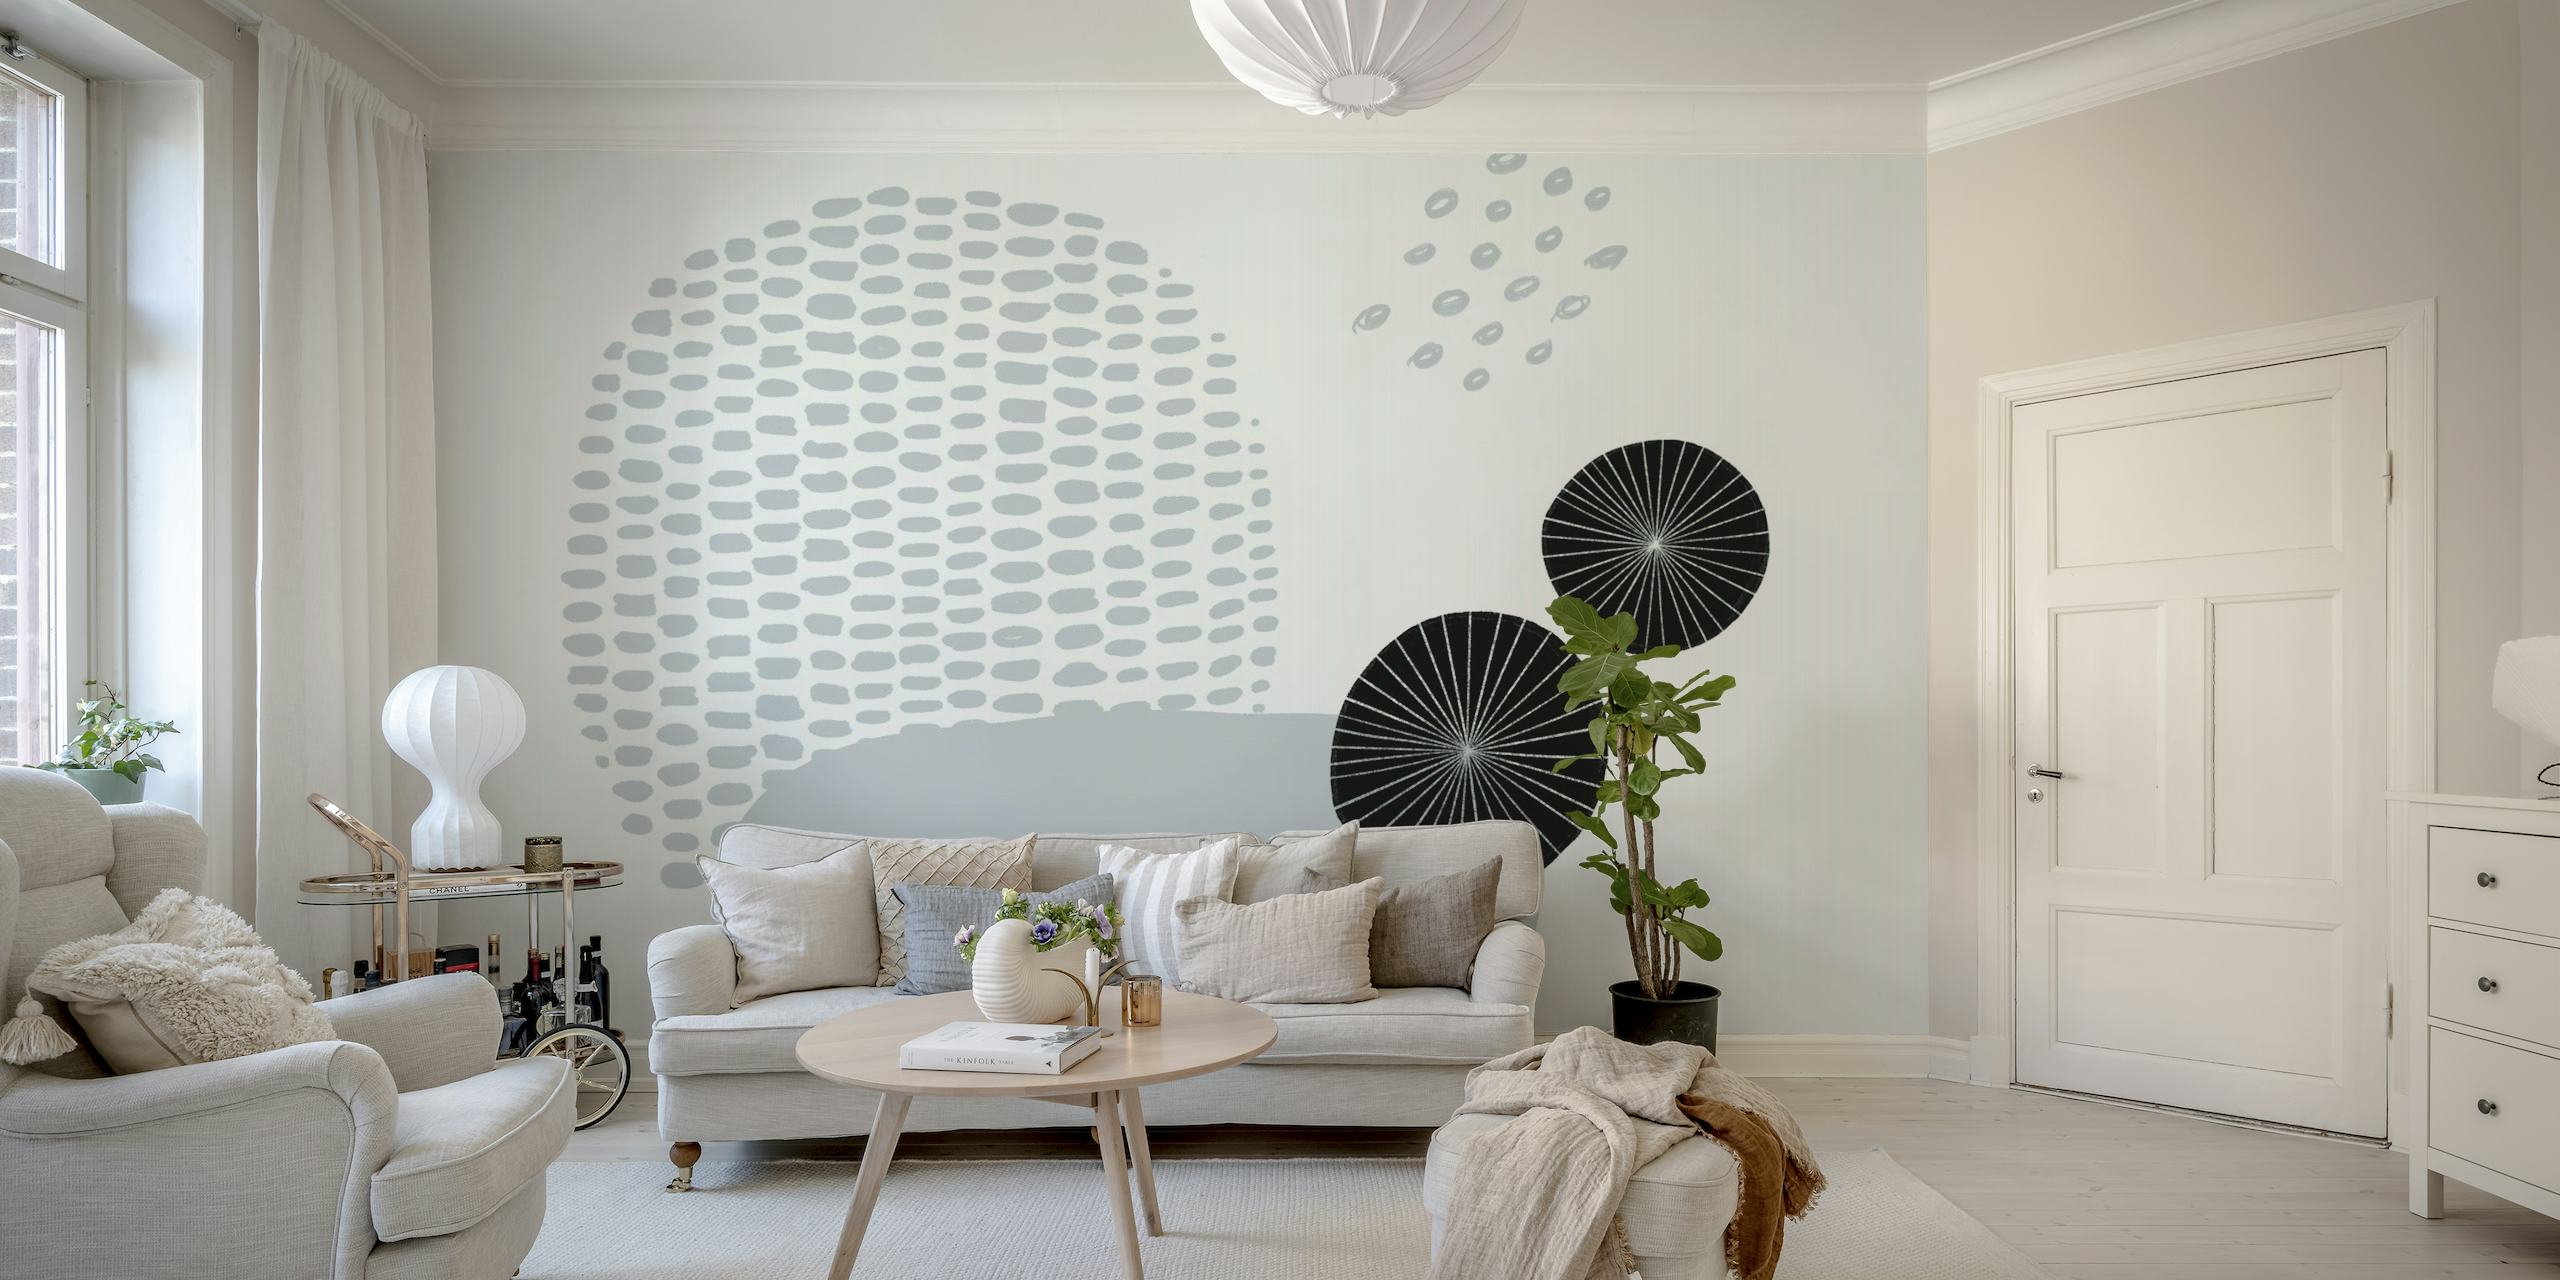 Abstract grayscale wall mural with spherical shapes and dot patterns